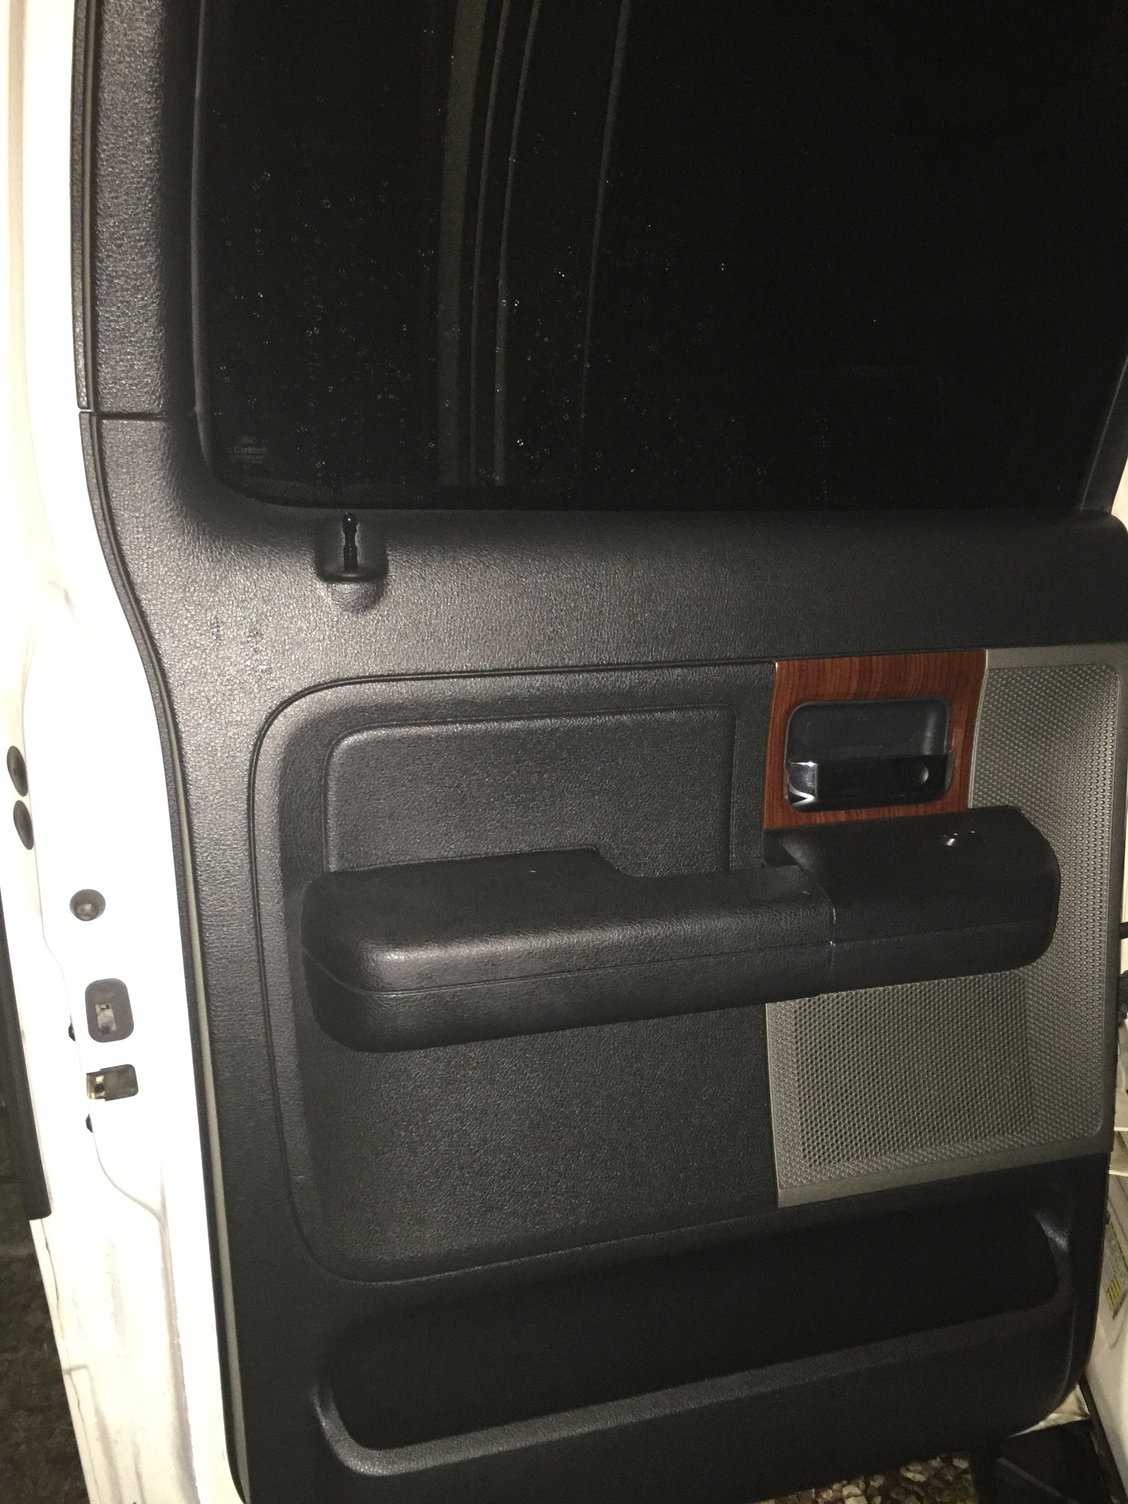 Supercrew Lariat Component Speakers In Rear Doors Ford F150 Forum Community Of Ford Truck Fans